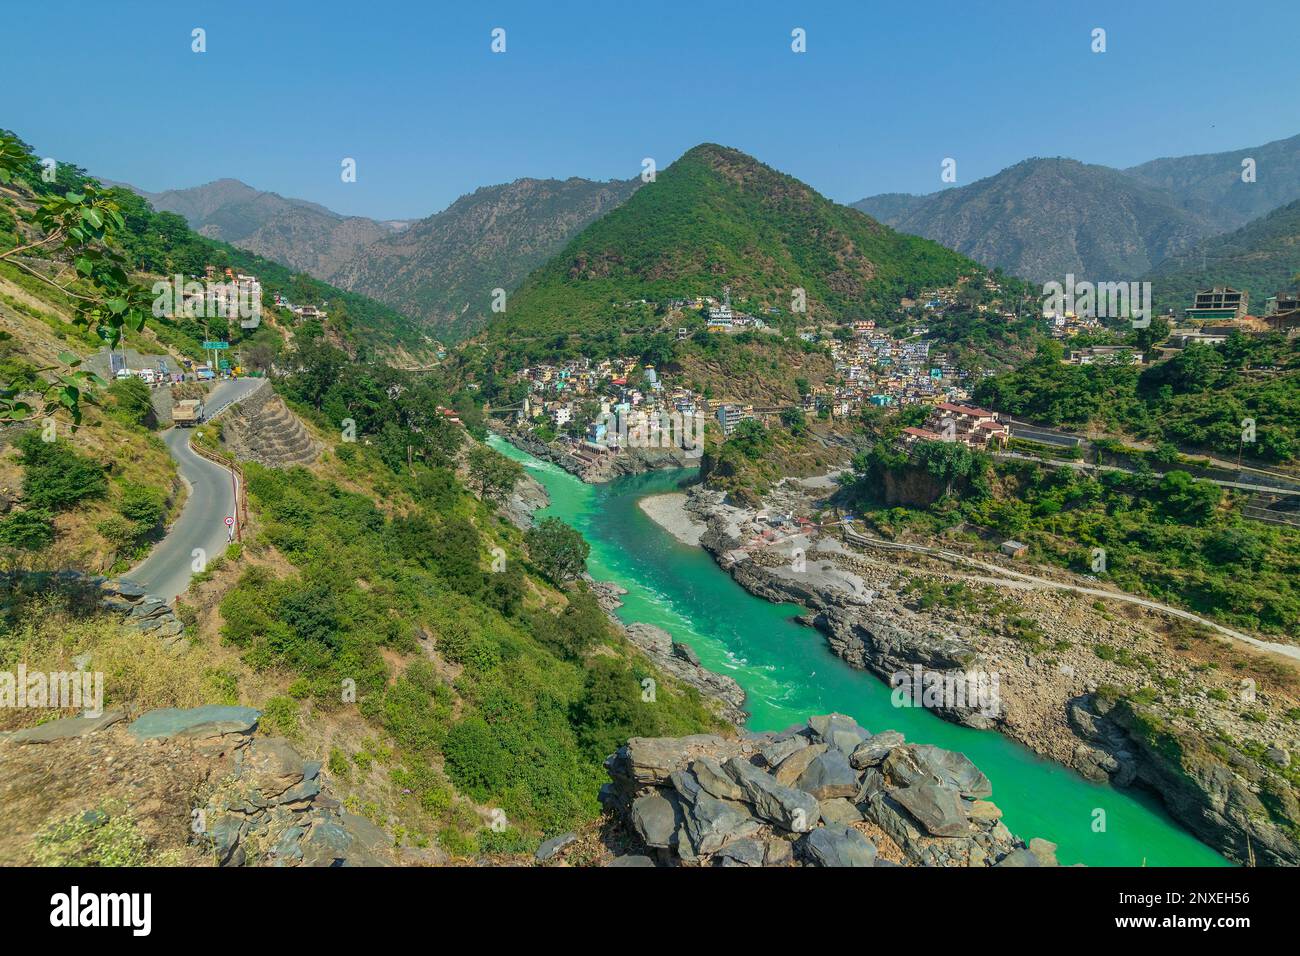 Devprayag, Godly Confluence,Garhwal,Uttarakhand, India. Here Alaknanda meets the Bhagirathi river and both rivers thereafter flow on as Ganges river. Stock Photo